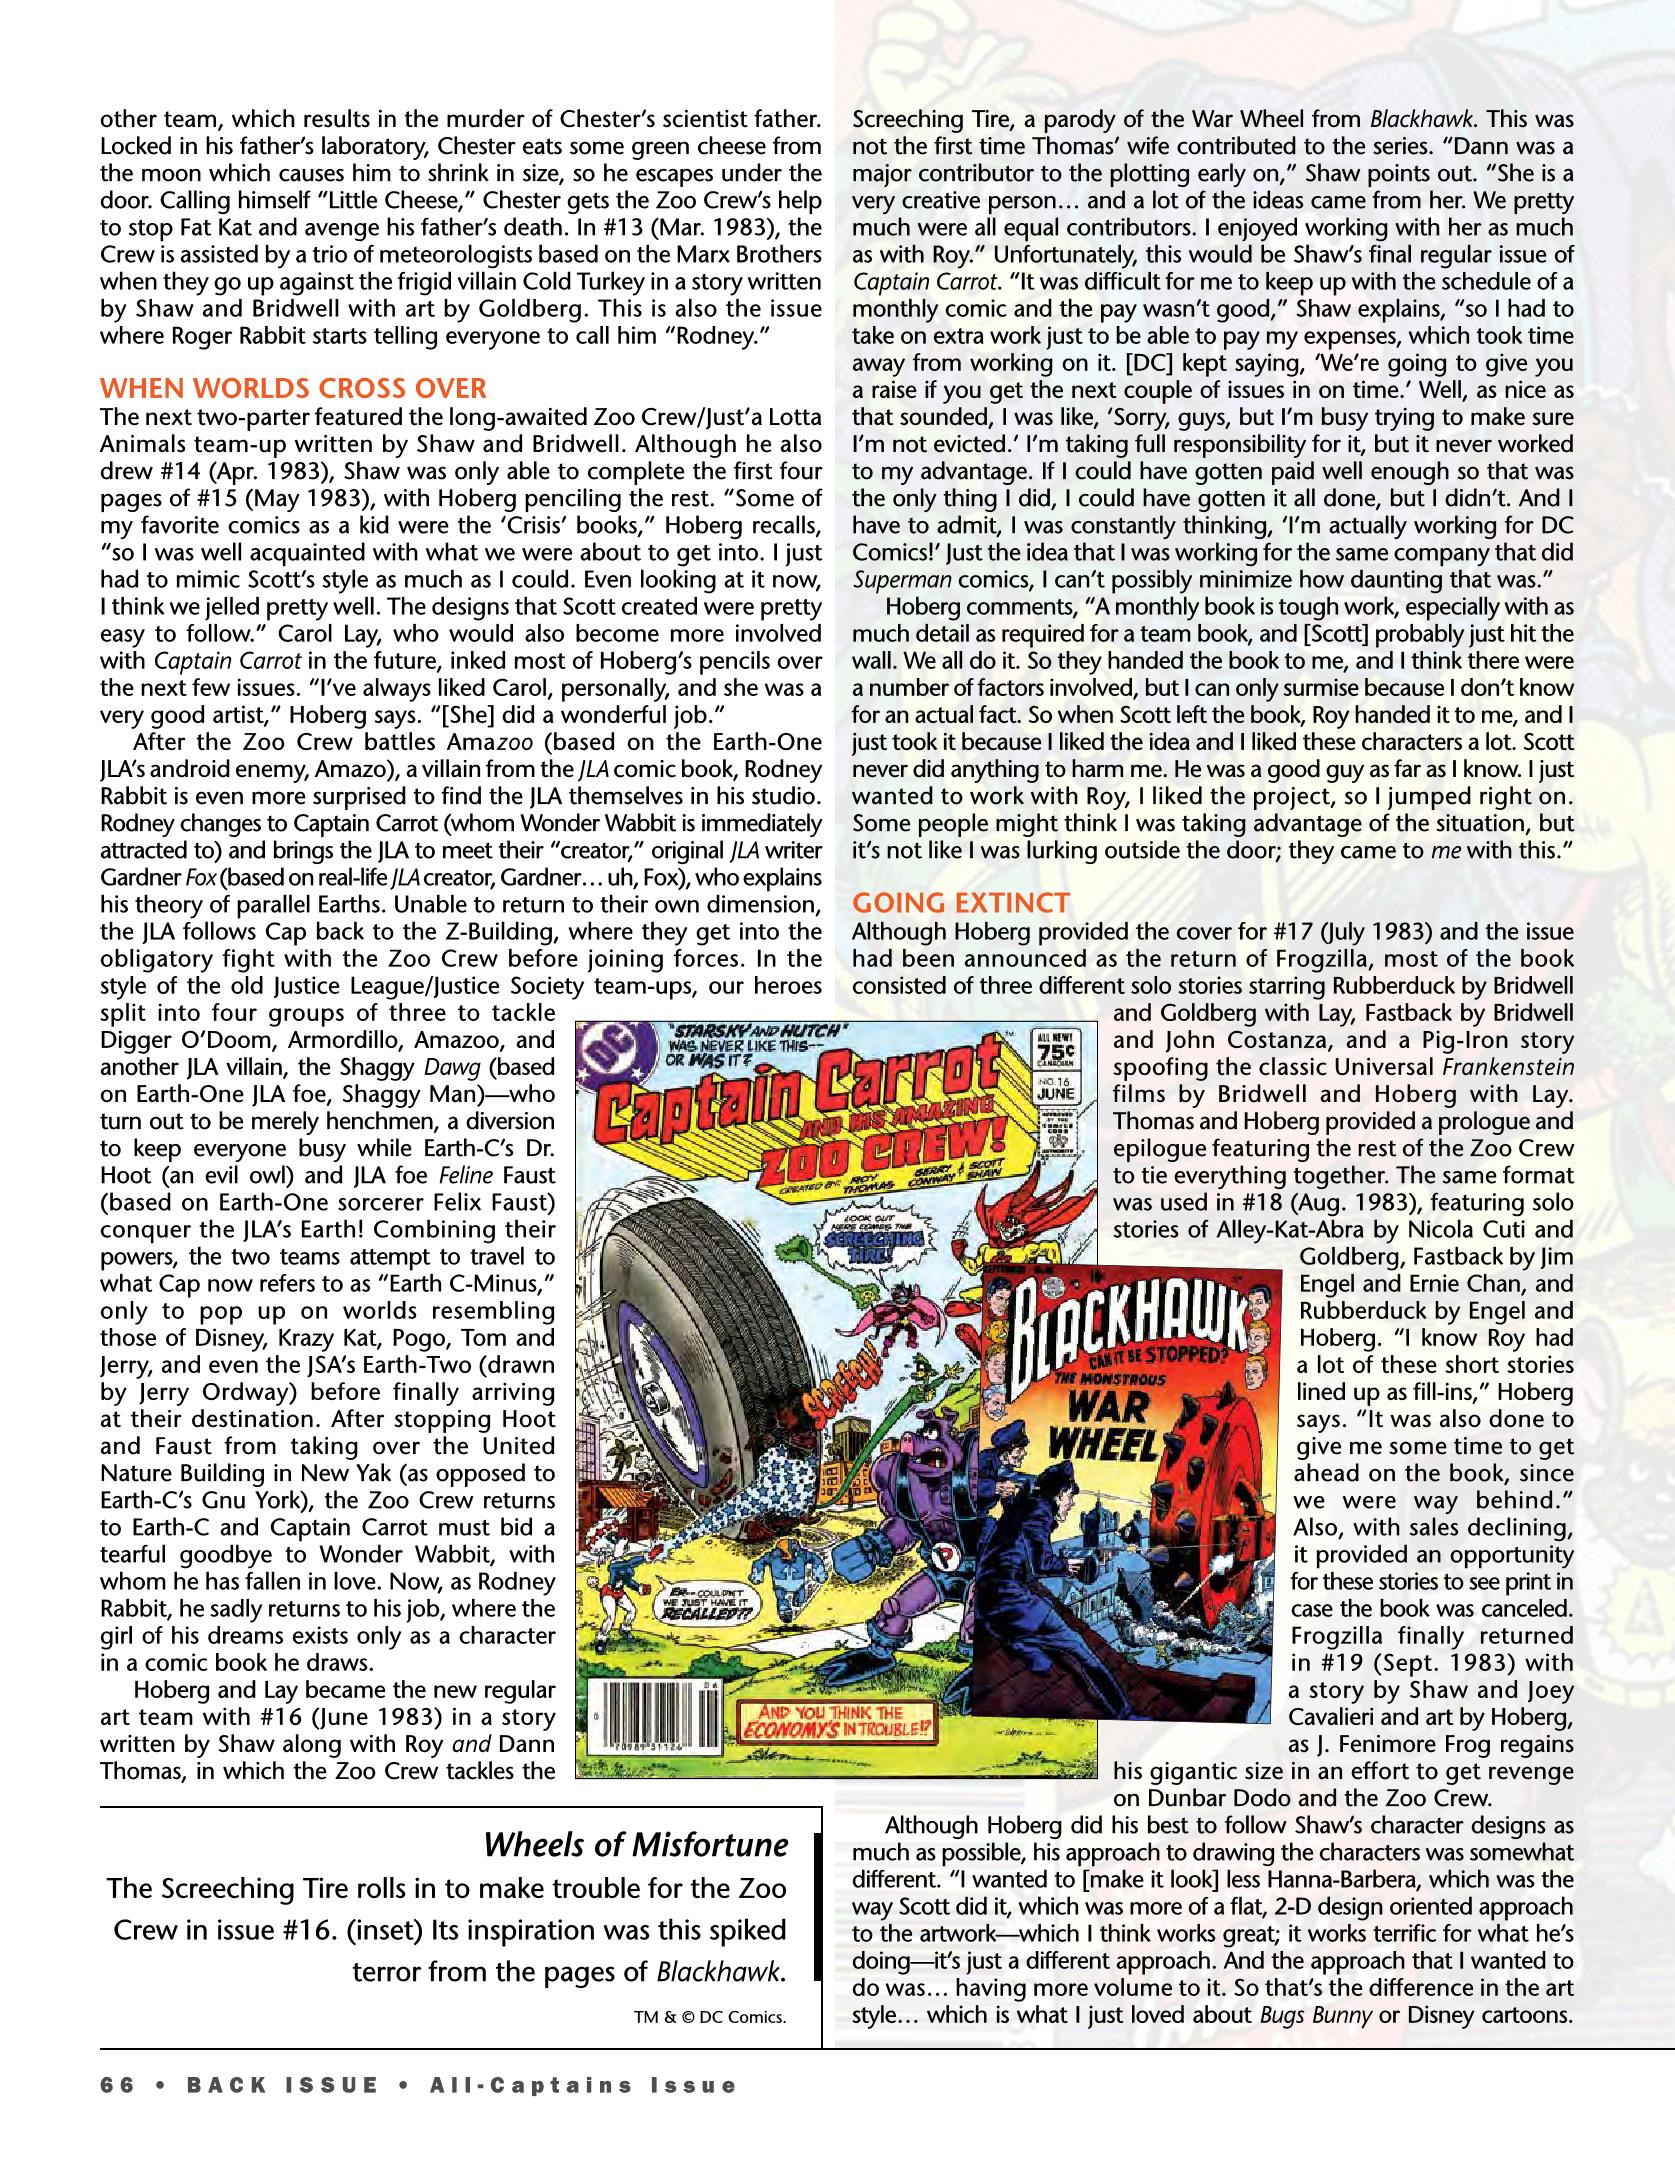 Read online Back Issue comic -  Issue #93 - 65